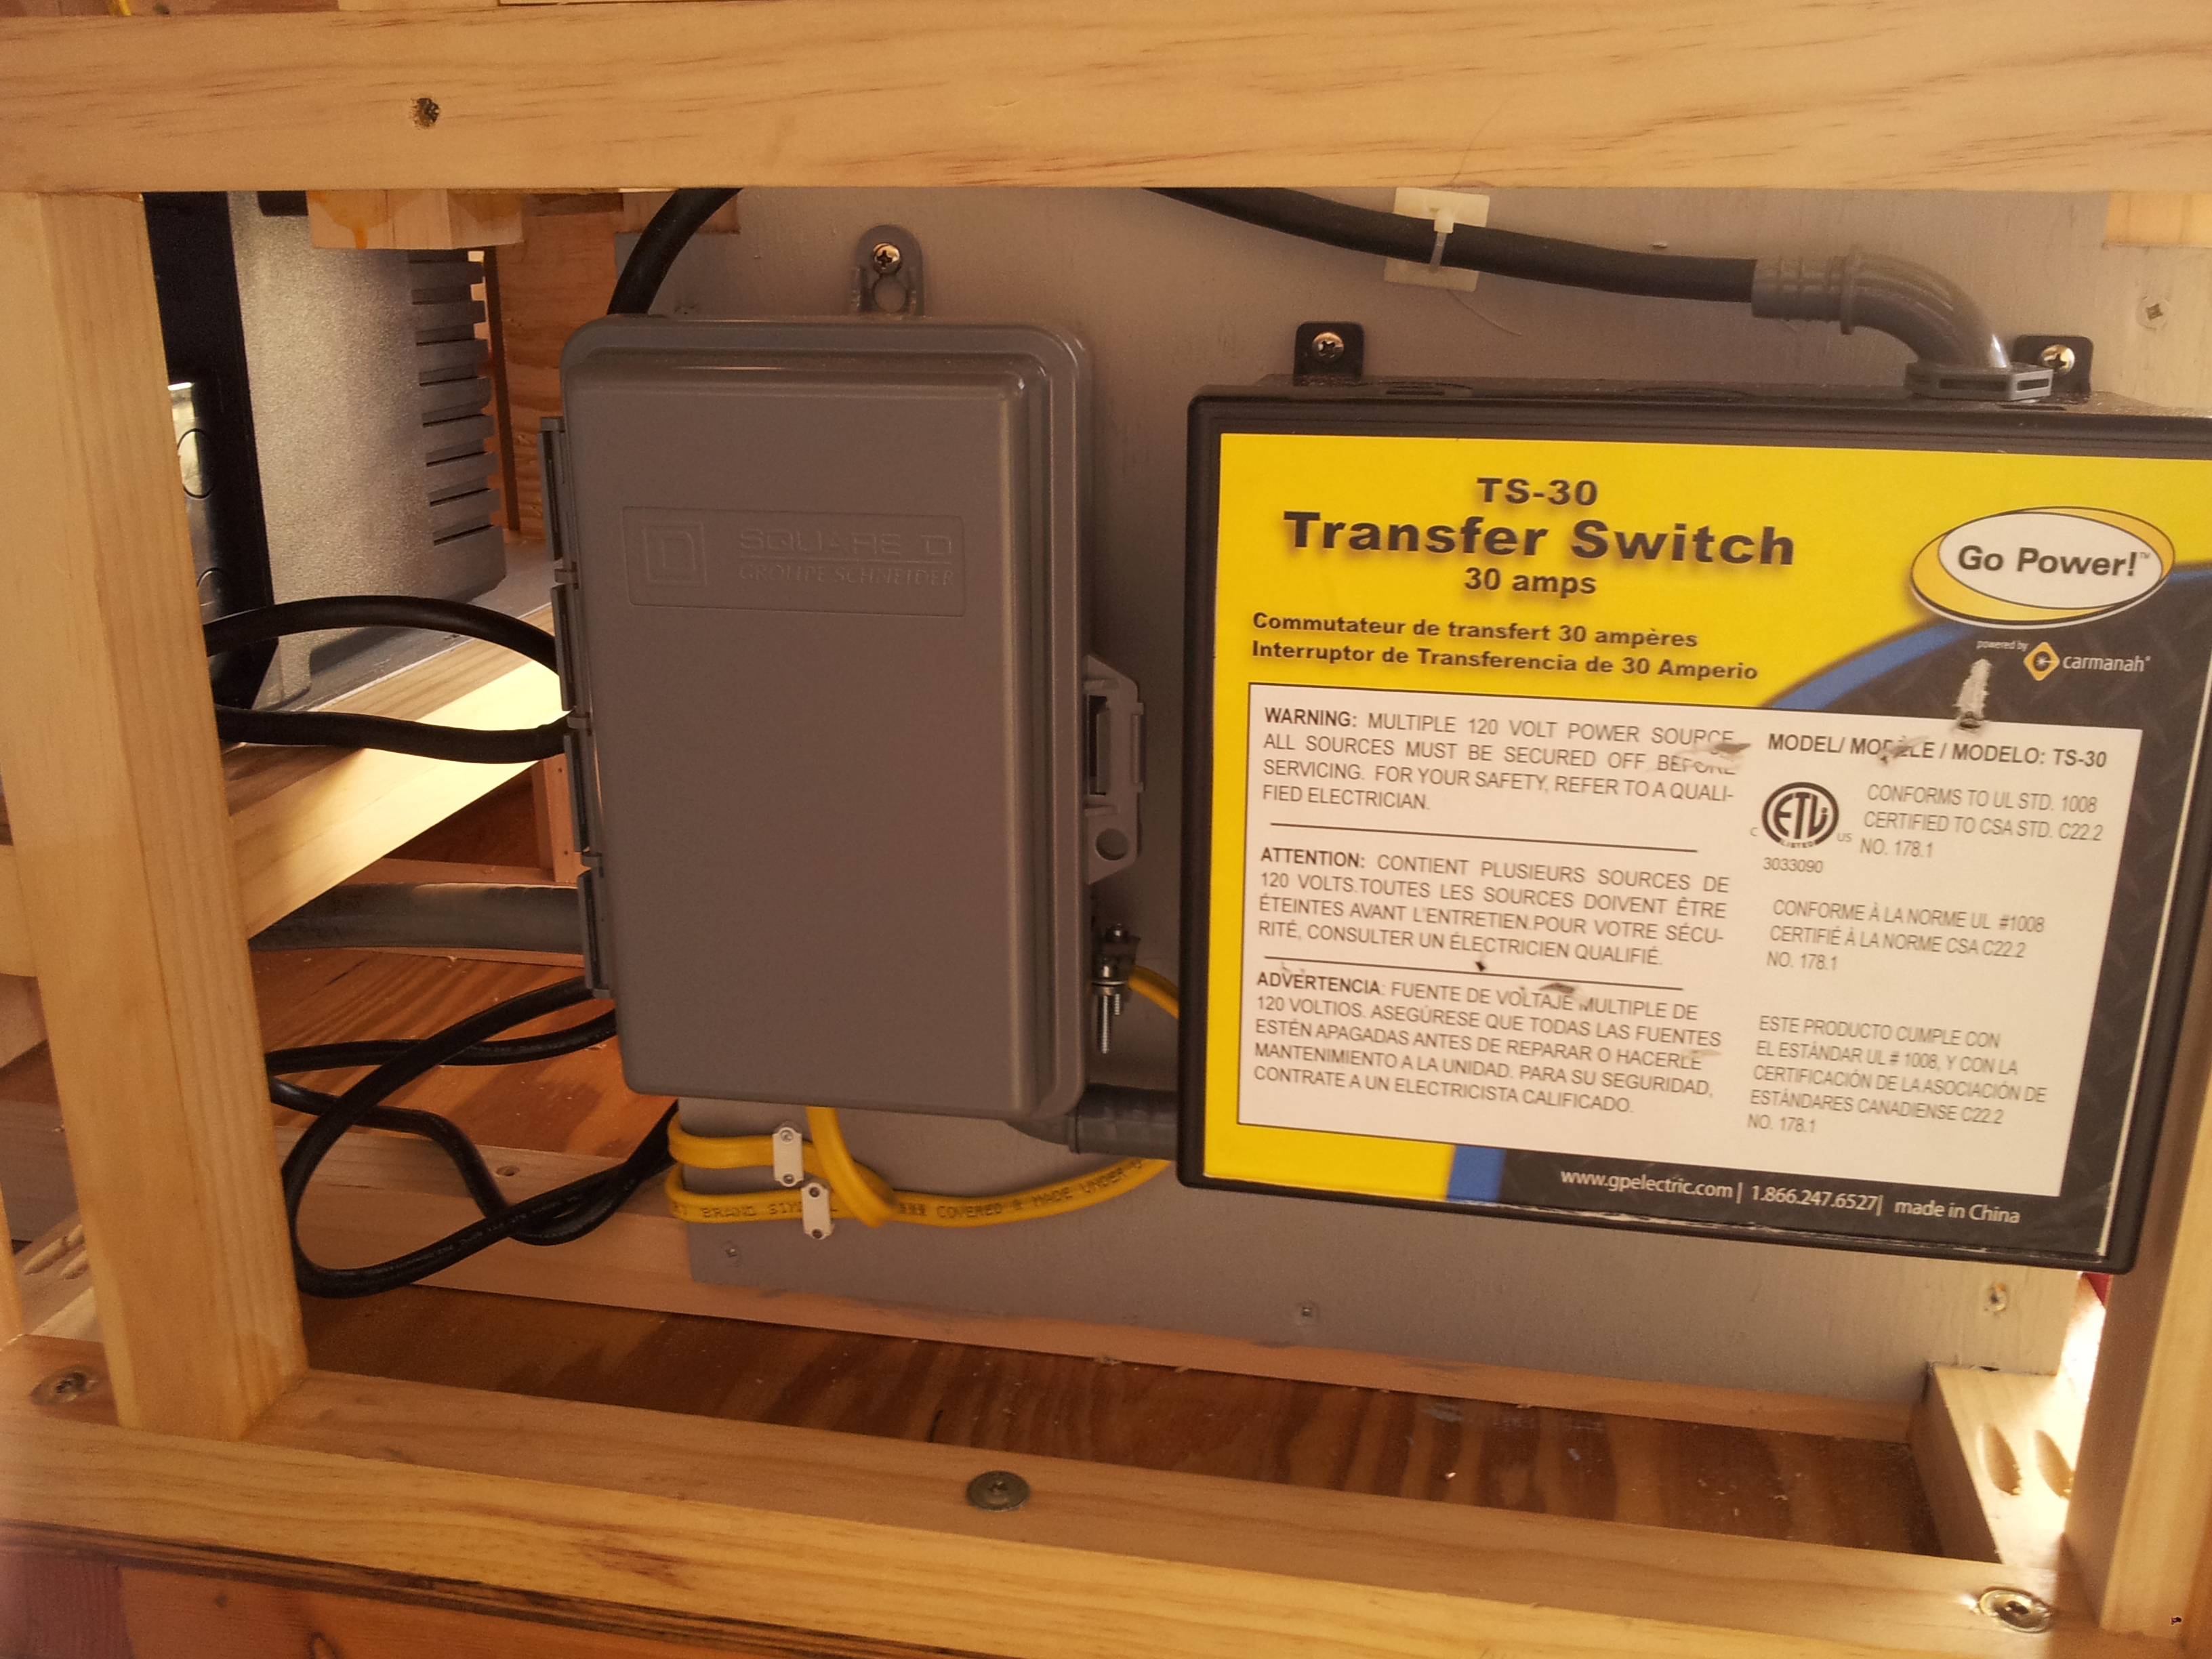 Breaker box and transfer switch